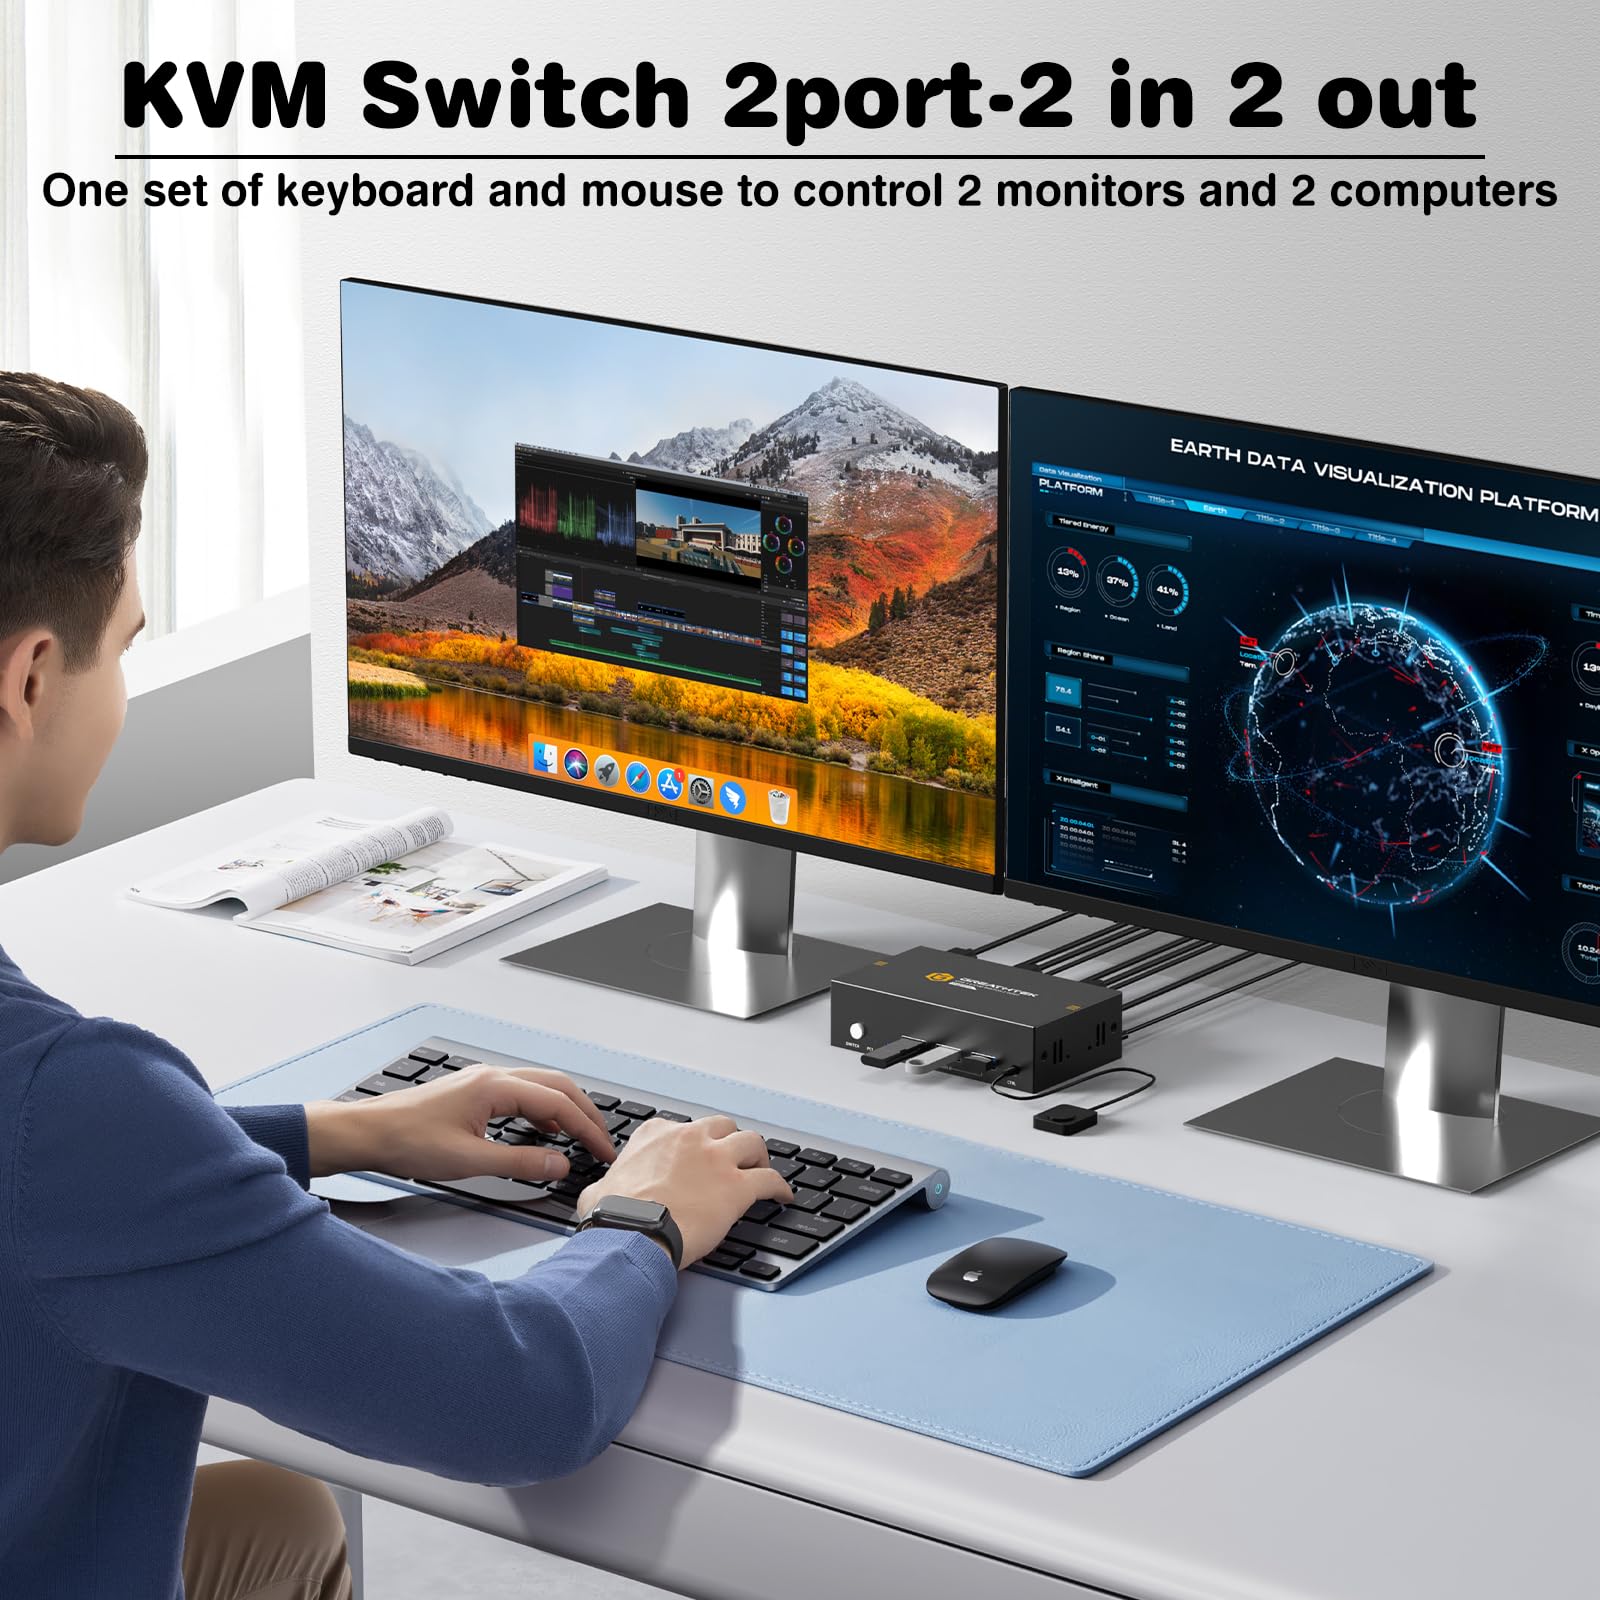 GREATHTEK HDMI KVM Switch 2 Port, 4 USB2.0 Ports, Ultra HD 4K@30Hz, 2 PCs Share 1 Set of Keyboard, Mouse and Monitor, Support Wireless Keyboard and Mouse